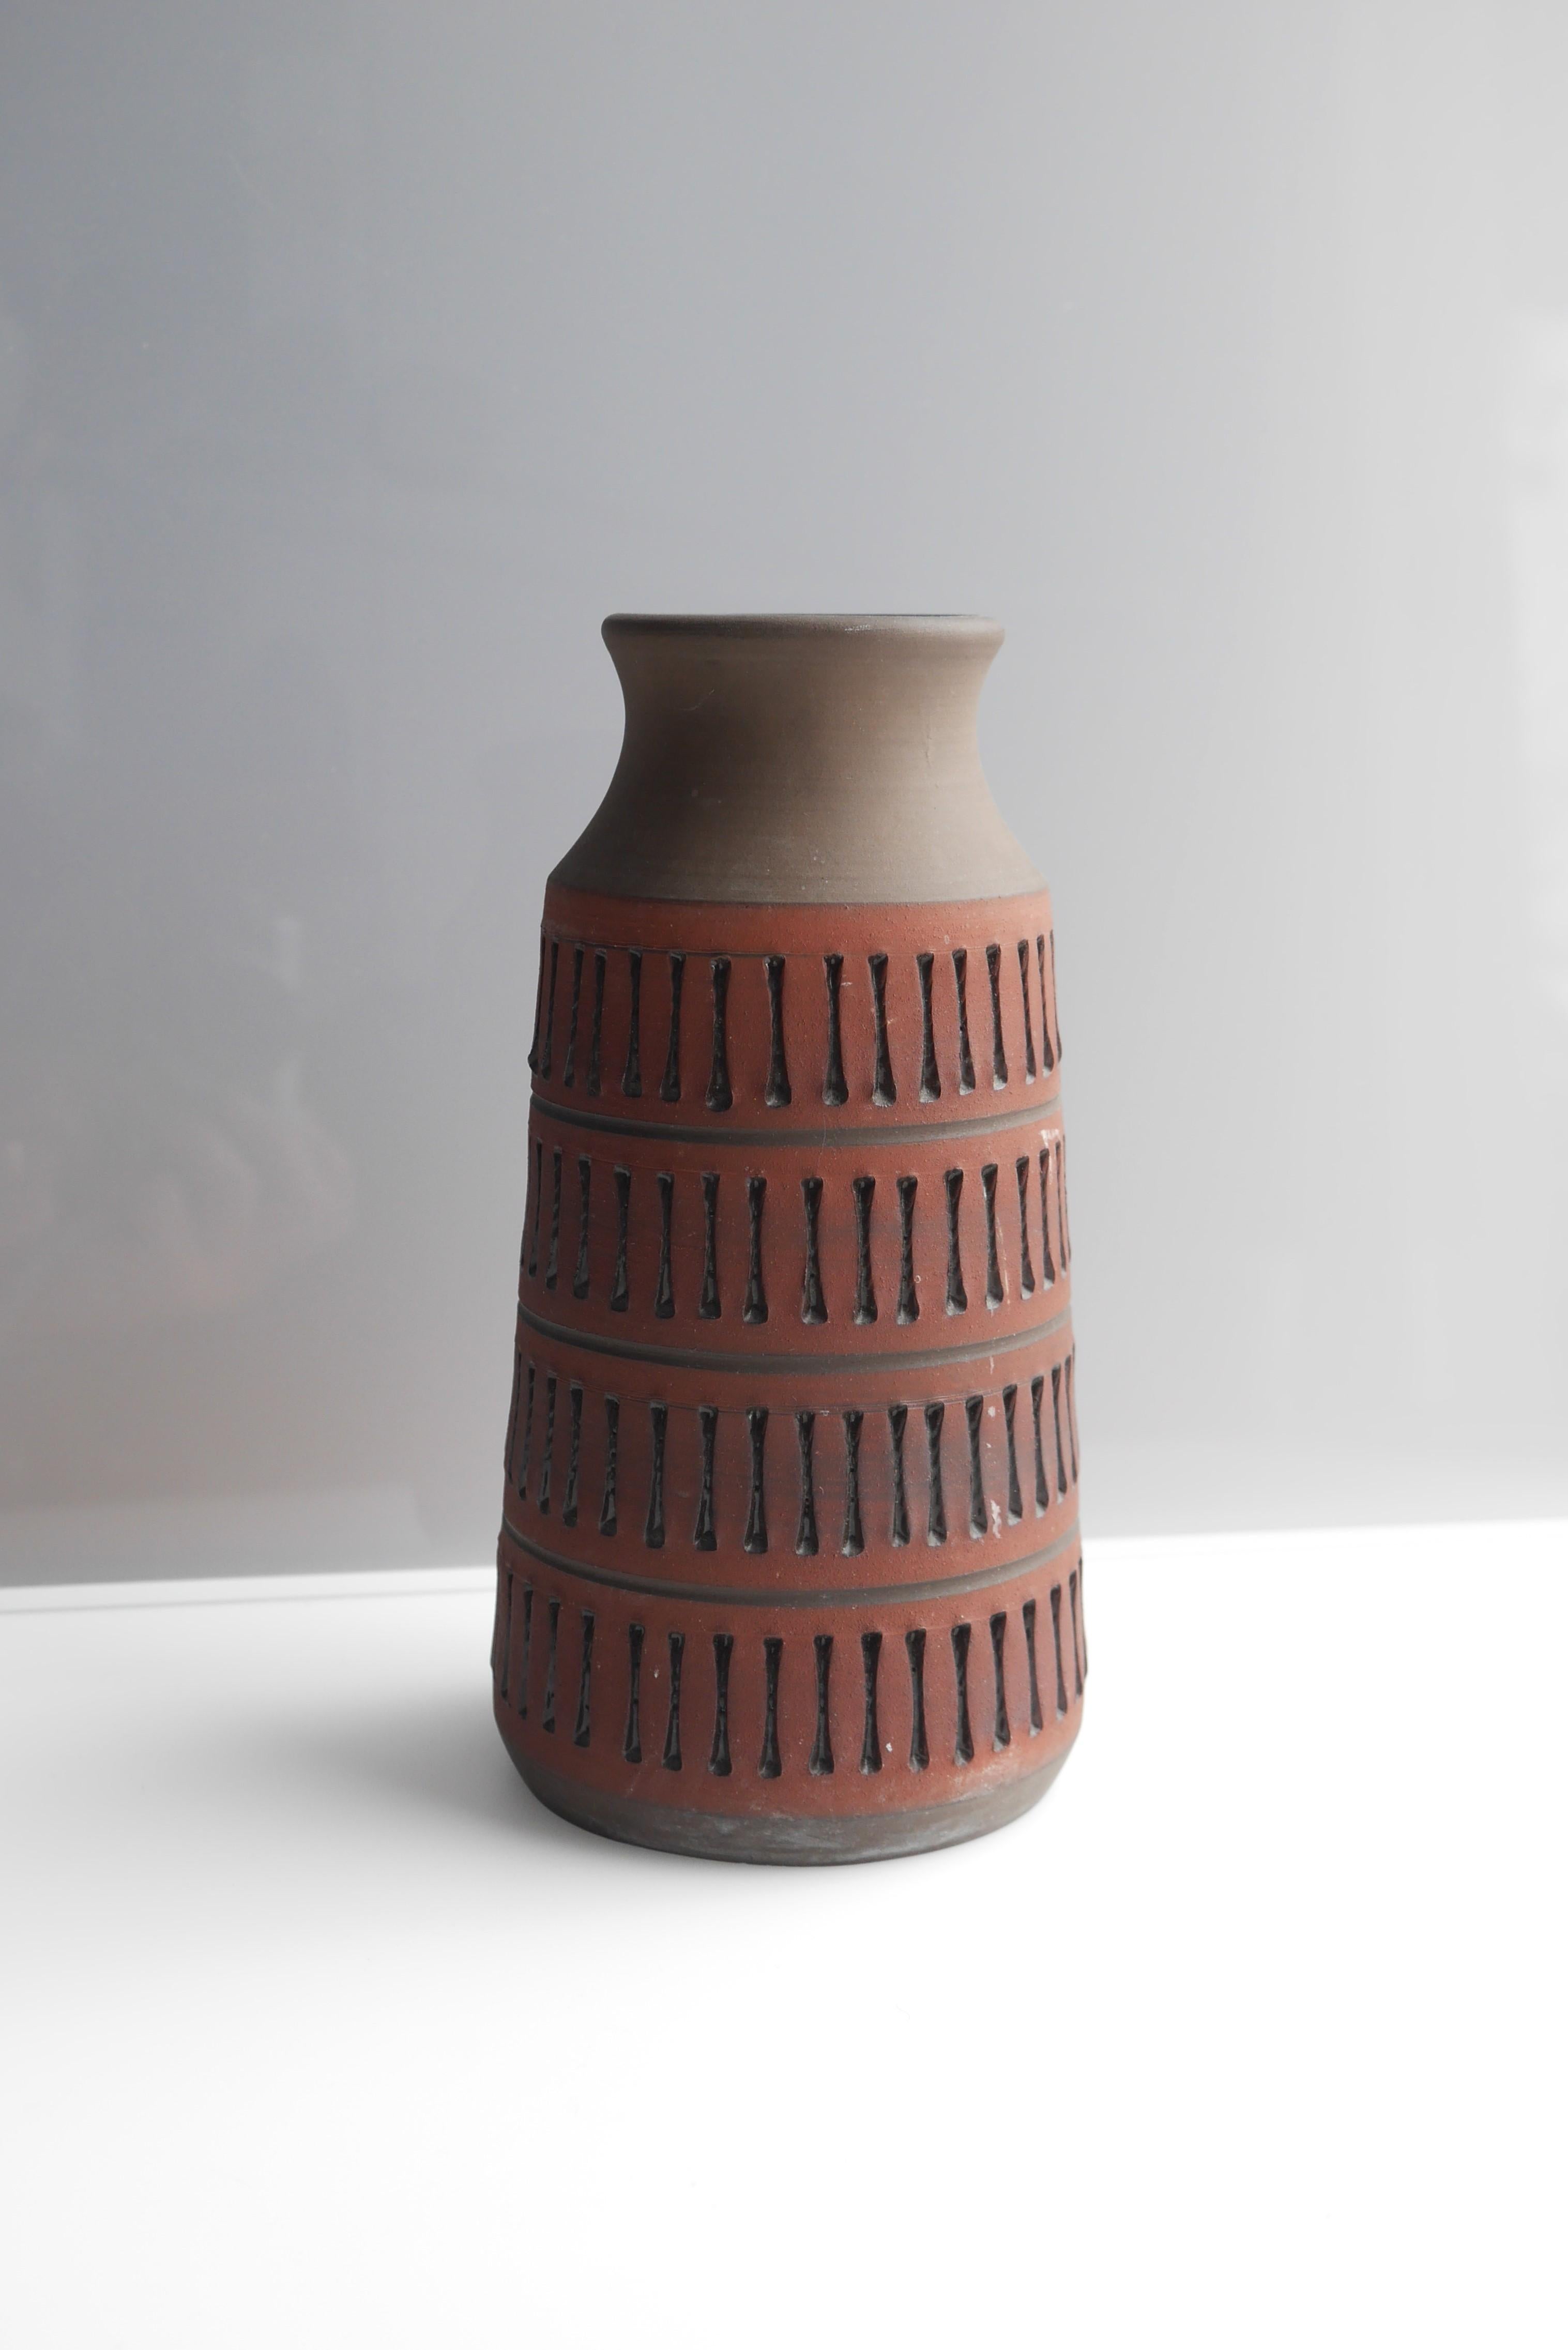 A fantastic vintage brutalist art ceramic vase, handmade and design by Thomas Anagrius, for Alingsås Keramik, Sweden. The vase has a lovely colour, a deep red simple but effectful imprints and a nonglossy glazing. It is s the simple shape, colour of